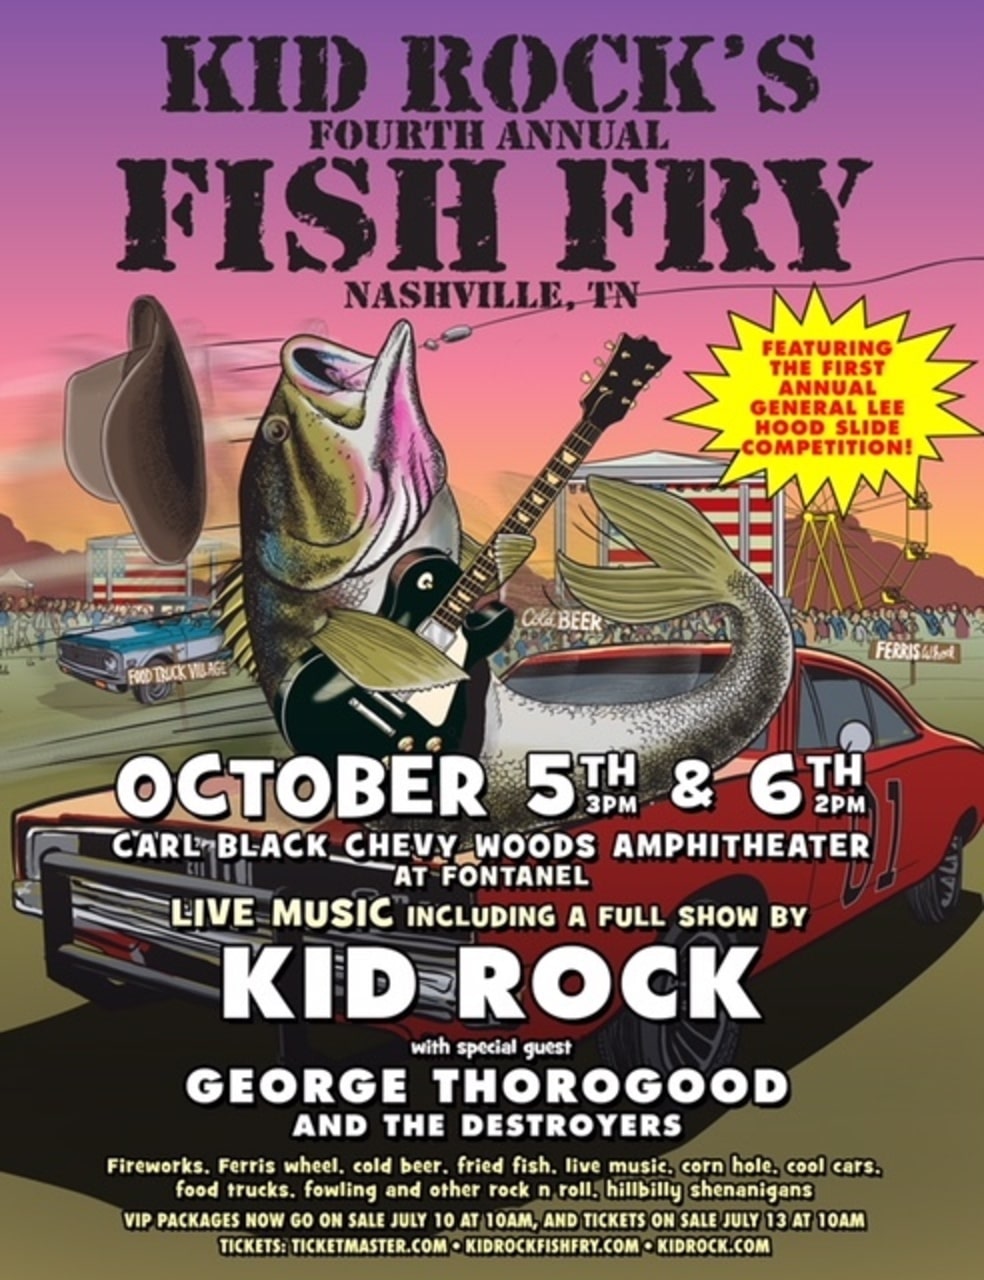 Kid Rock's 4th Annual Fish Fry Set for Oct. 5th & 6th